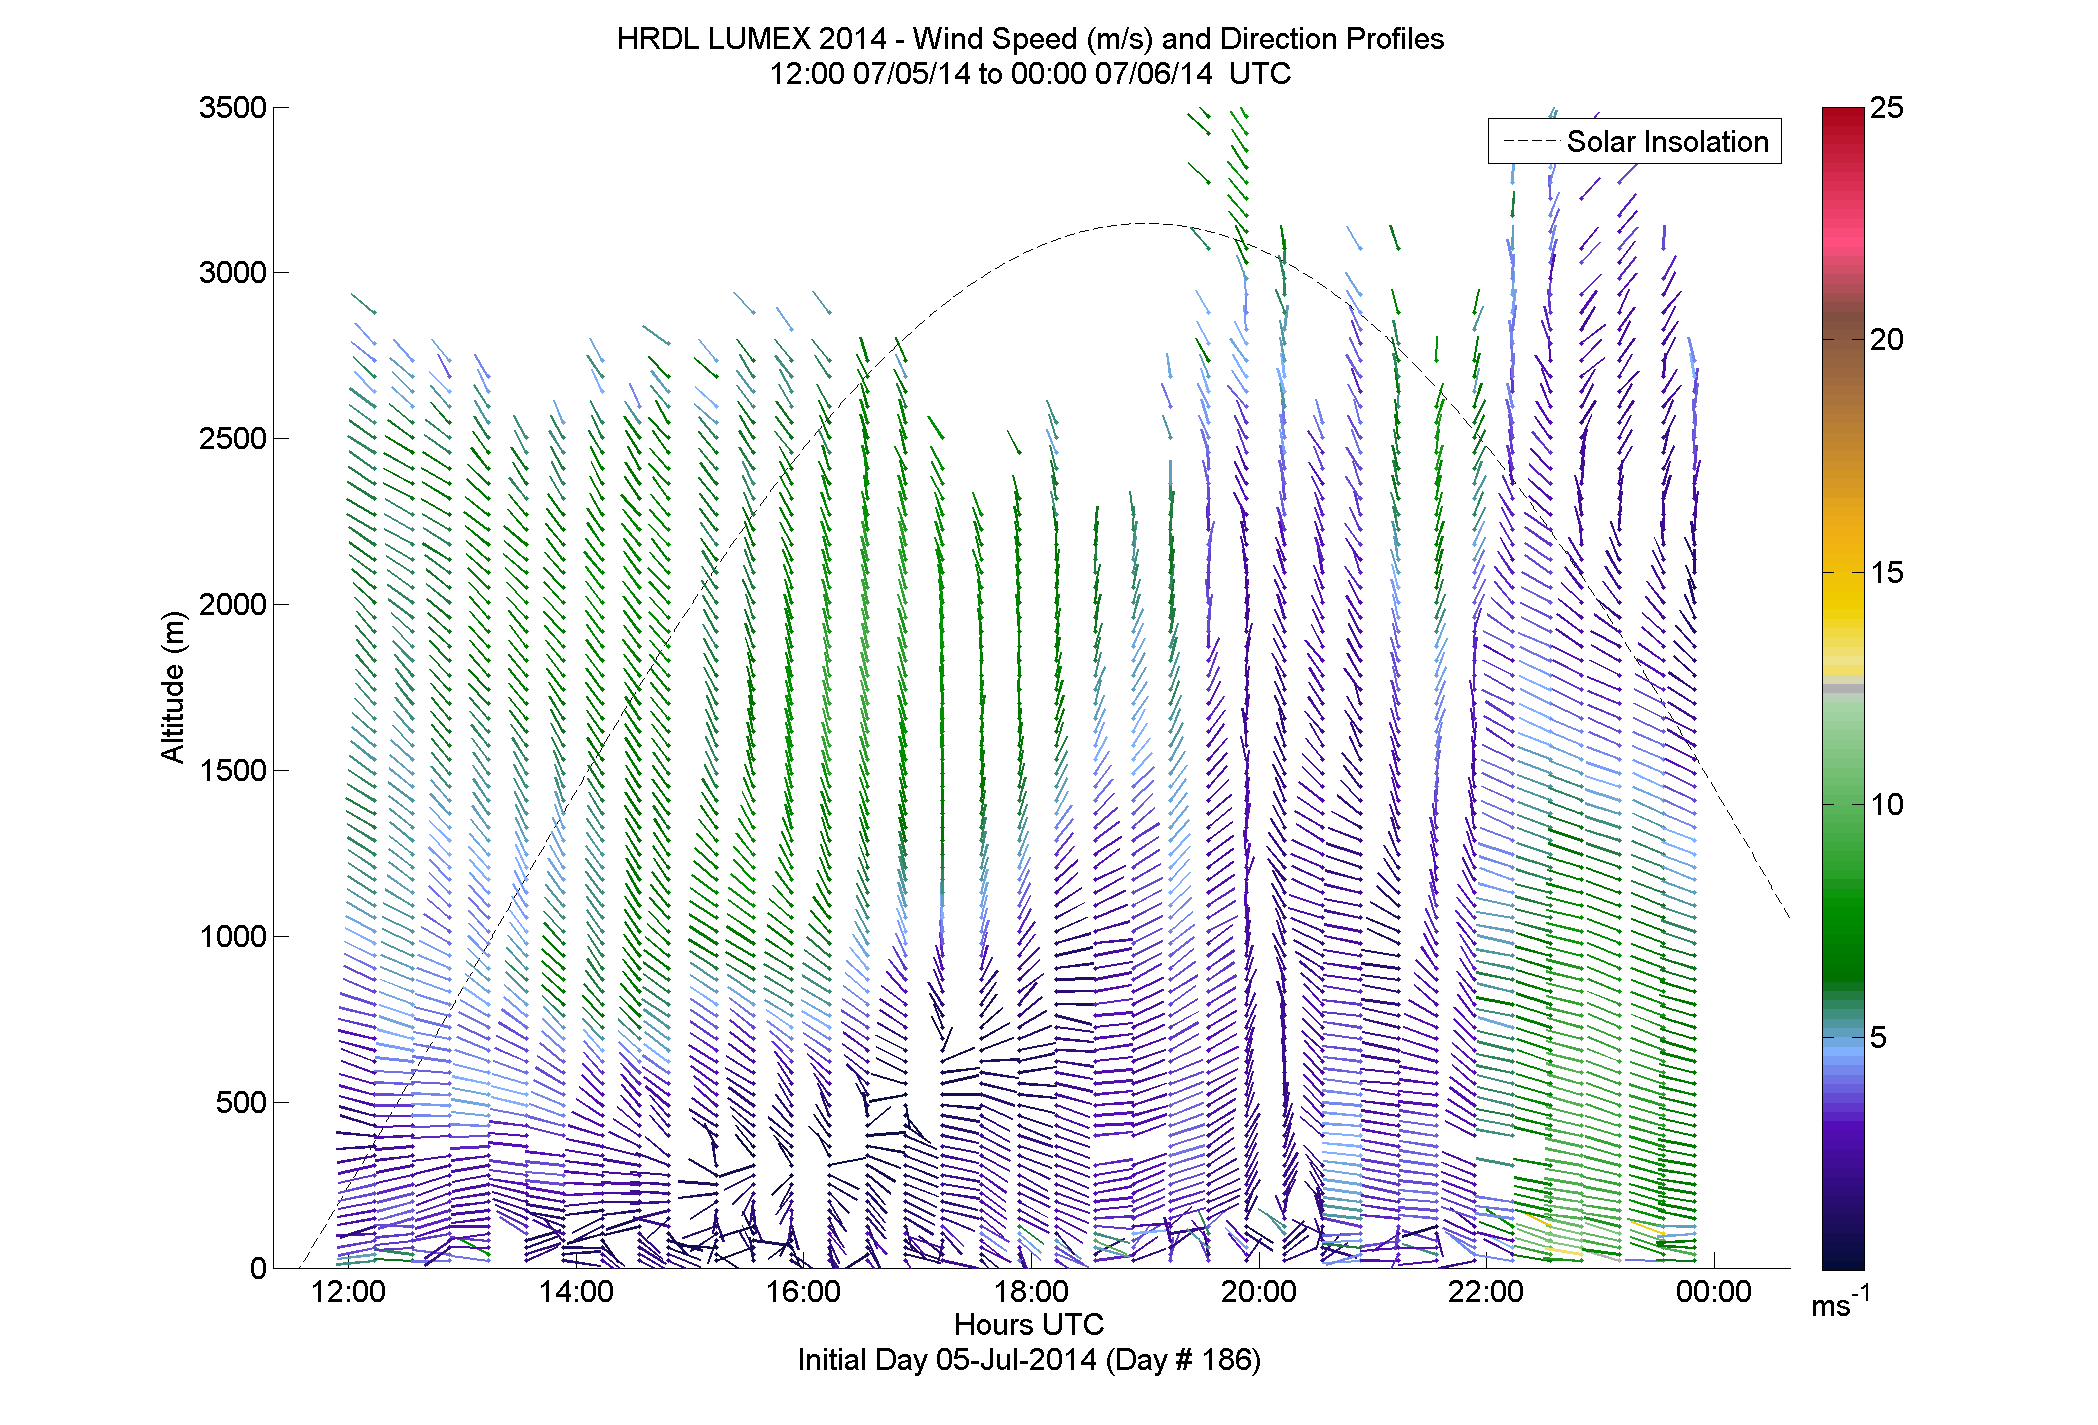 HRDL speed and direction profile - July 5 pm